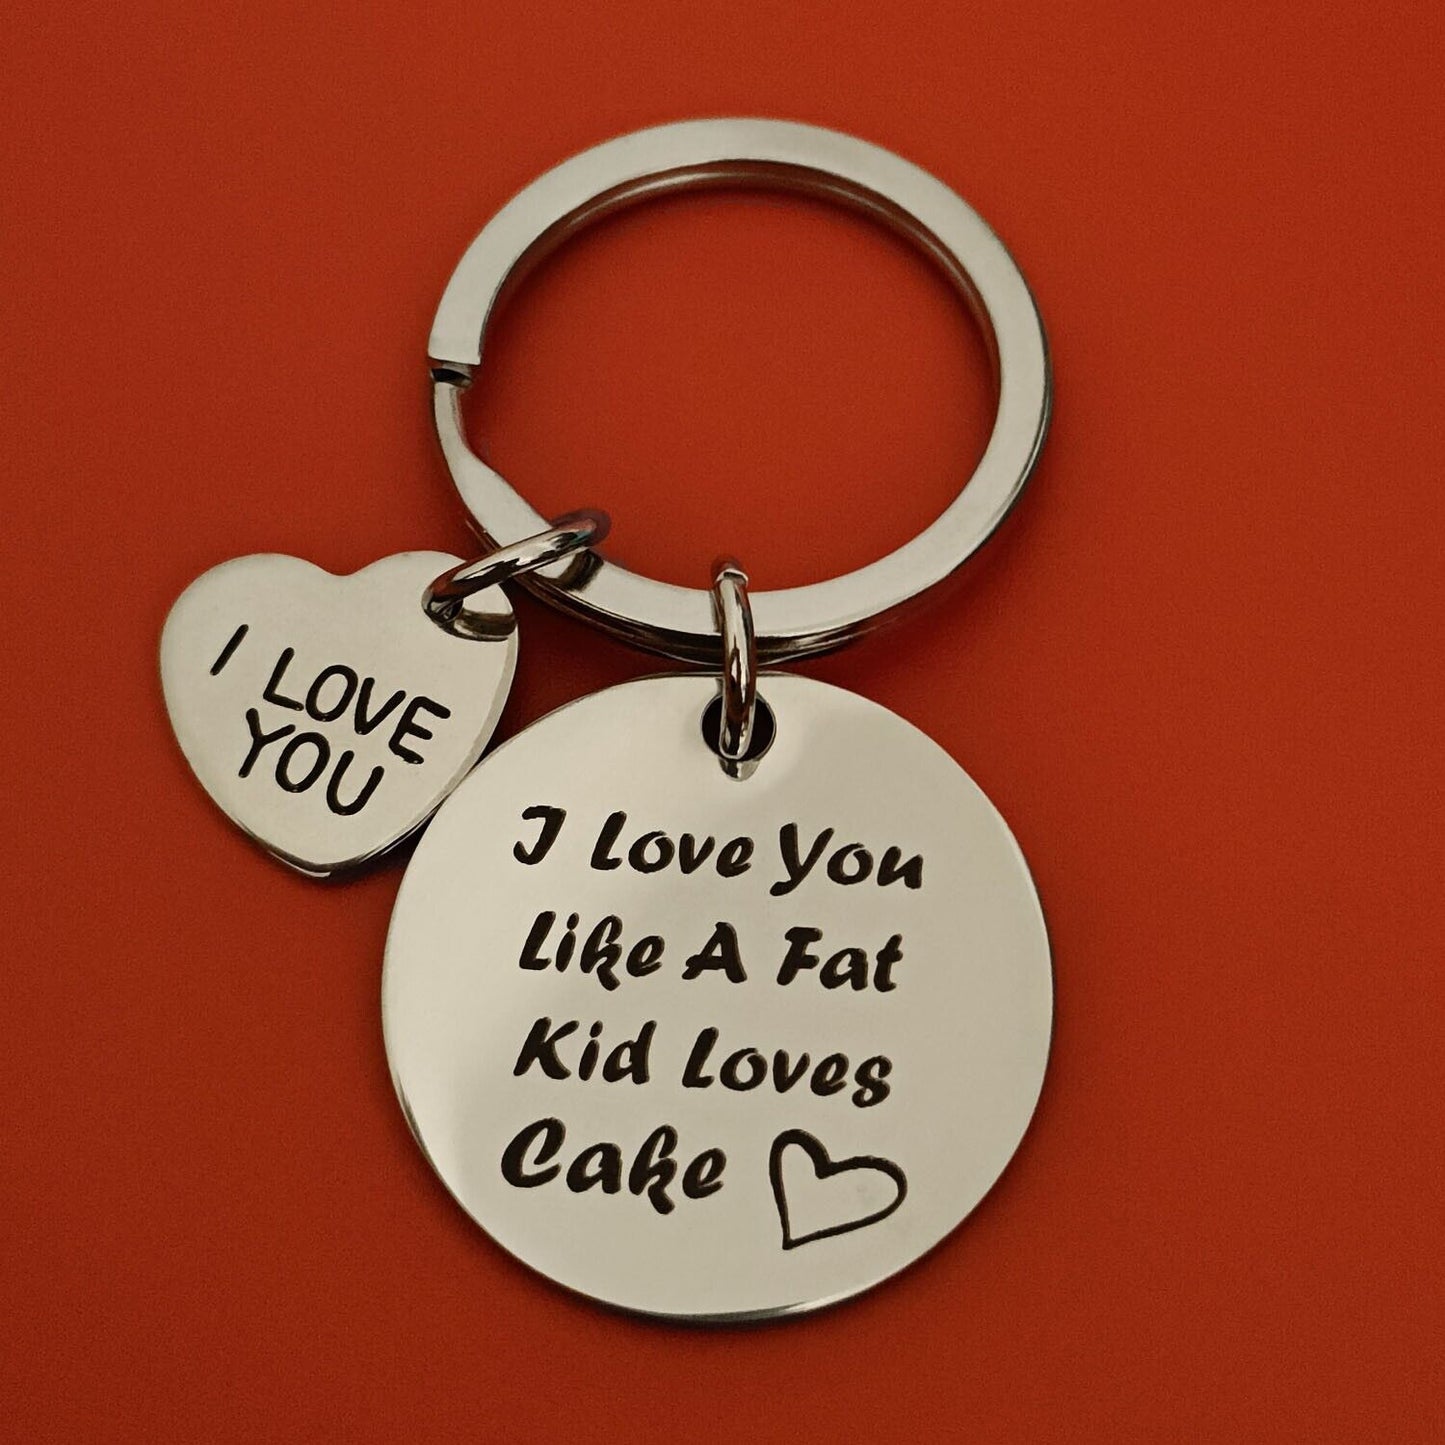 Couple Funny Keychain Gifts For Him Her Girlfriend Boyfriend Love Key Ring Tag